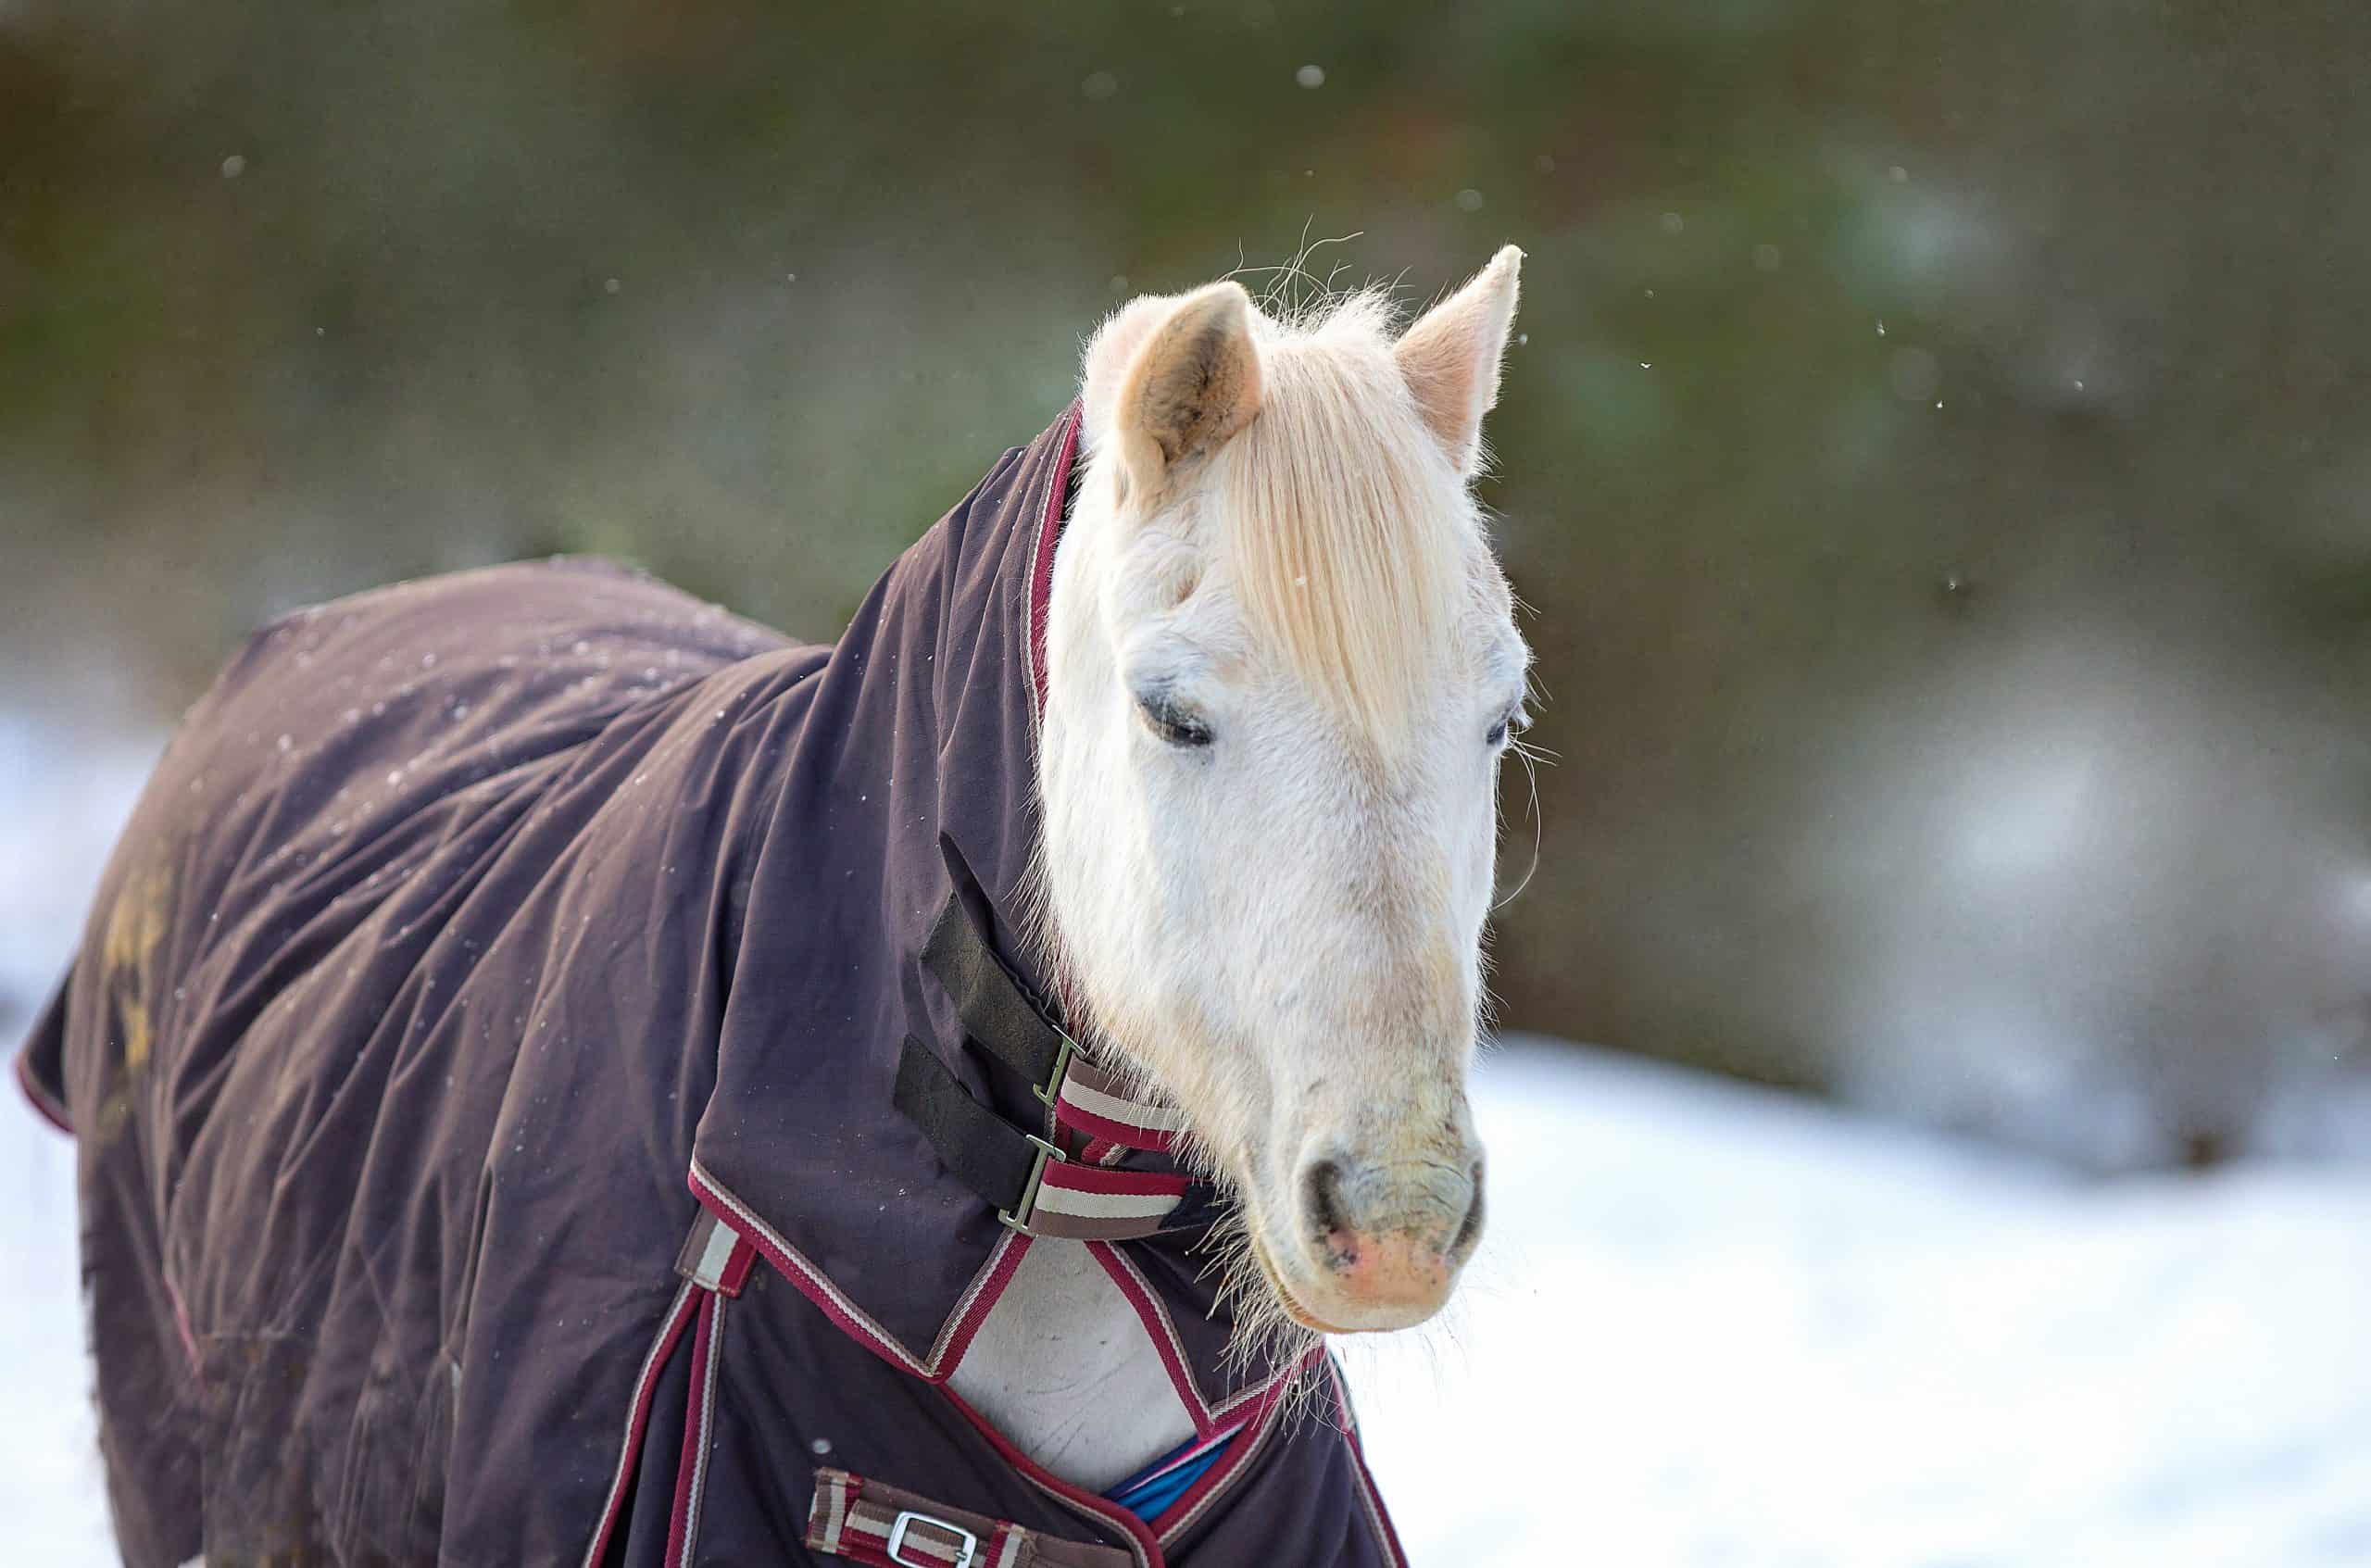 A closeup portrait of a white horse in a horse blanket, in a snowy winter setting.